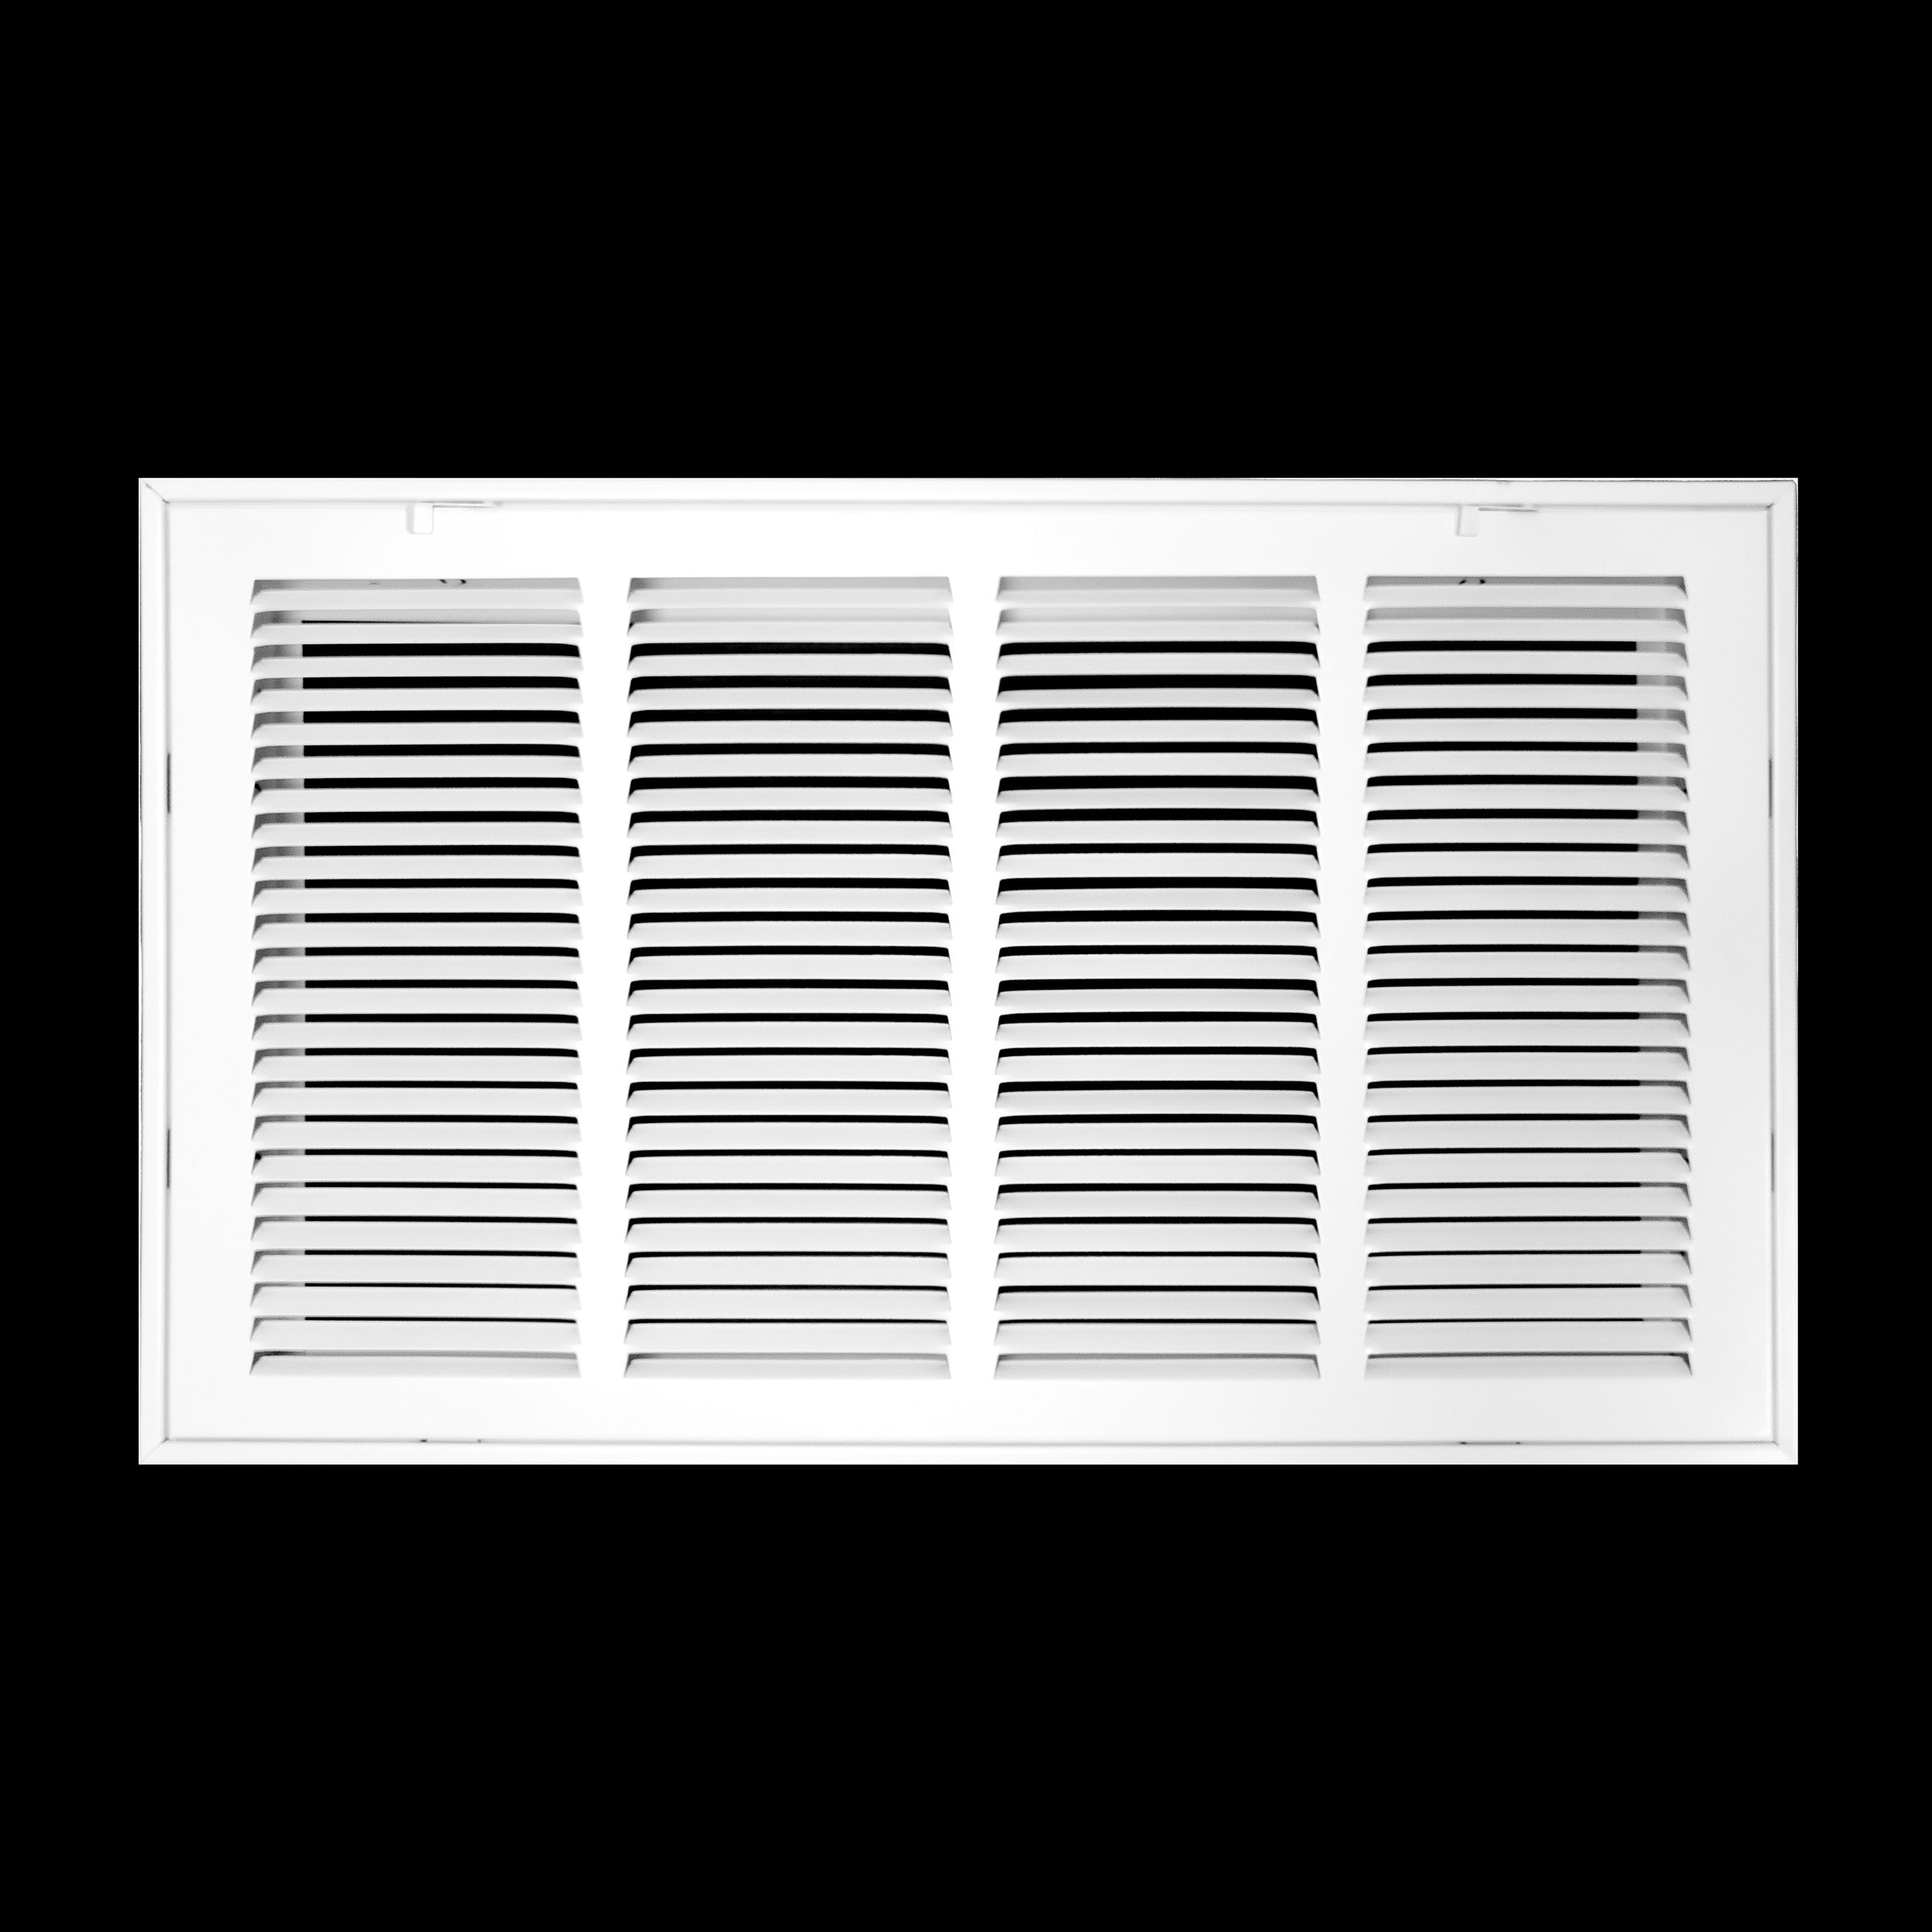 airgrilles 22" x 12" duct opening   hd steel return air filter grille for sidewall and ceiling 7hnd-rfg1-wh-22x12 038775638241 - 1